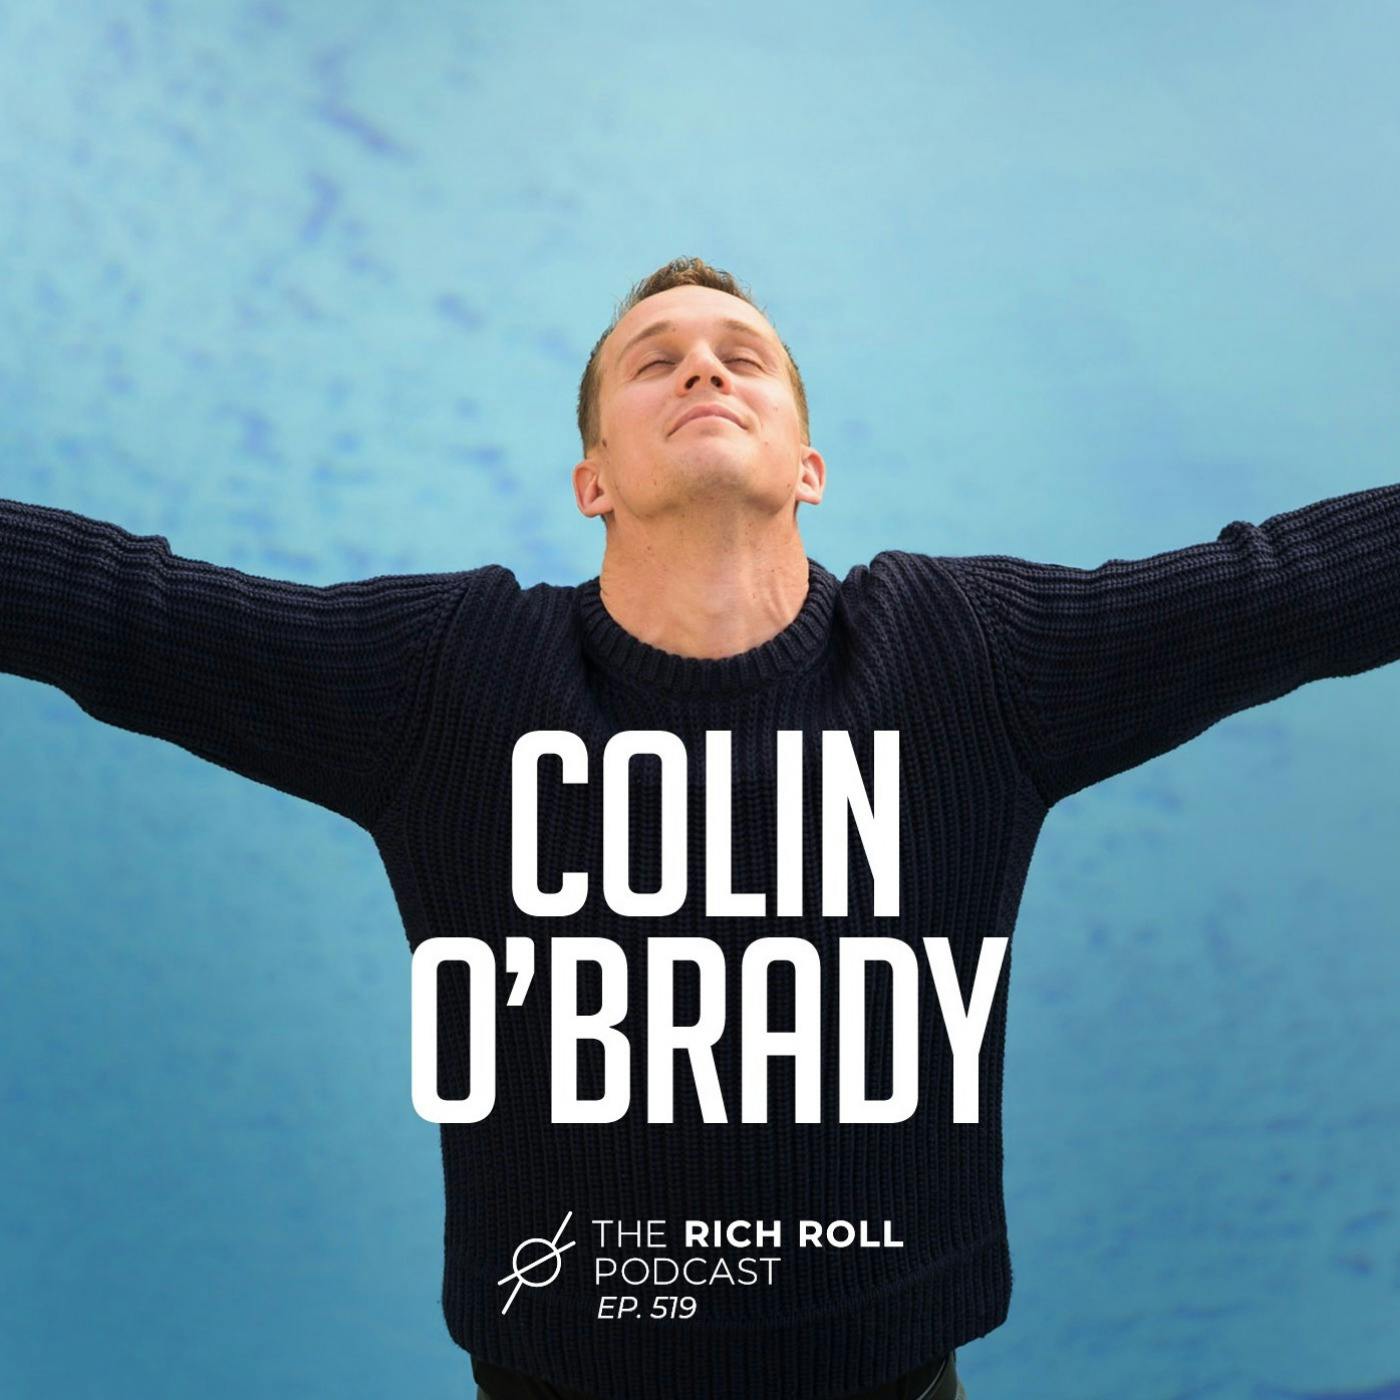 For Colin O'Brady, Infinite Love Fuels Human Potential